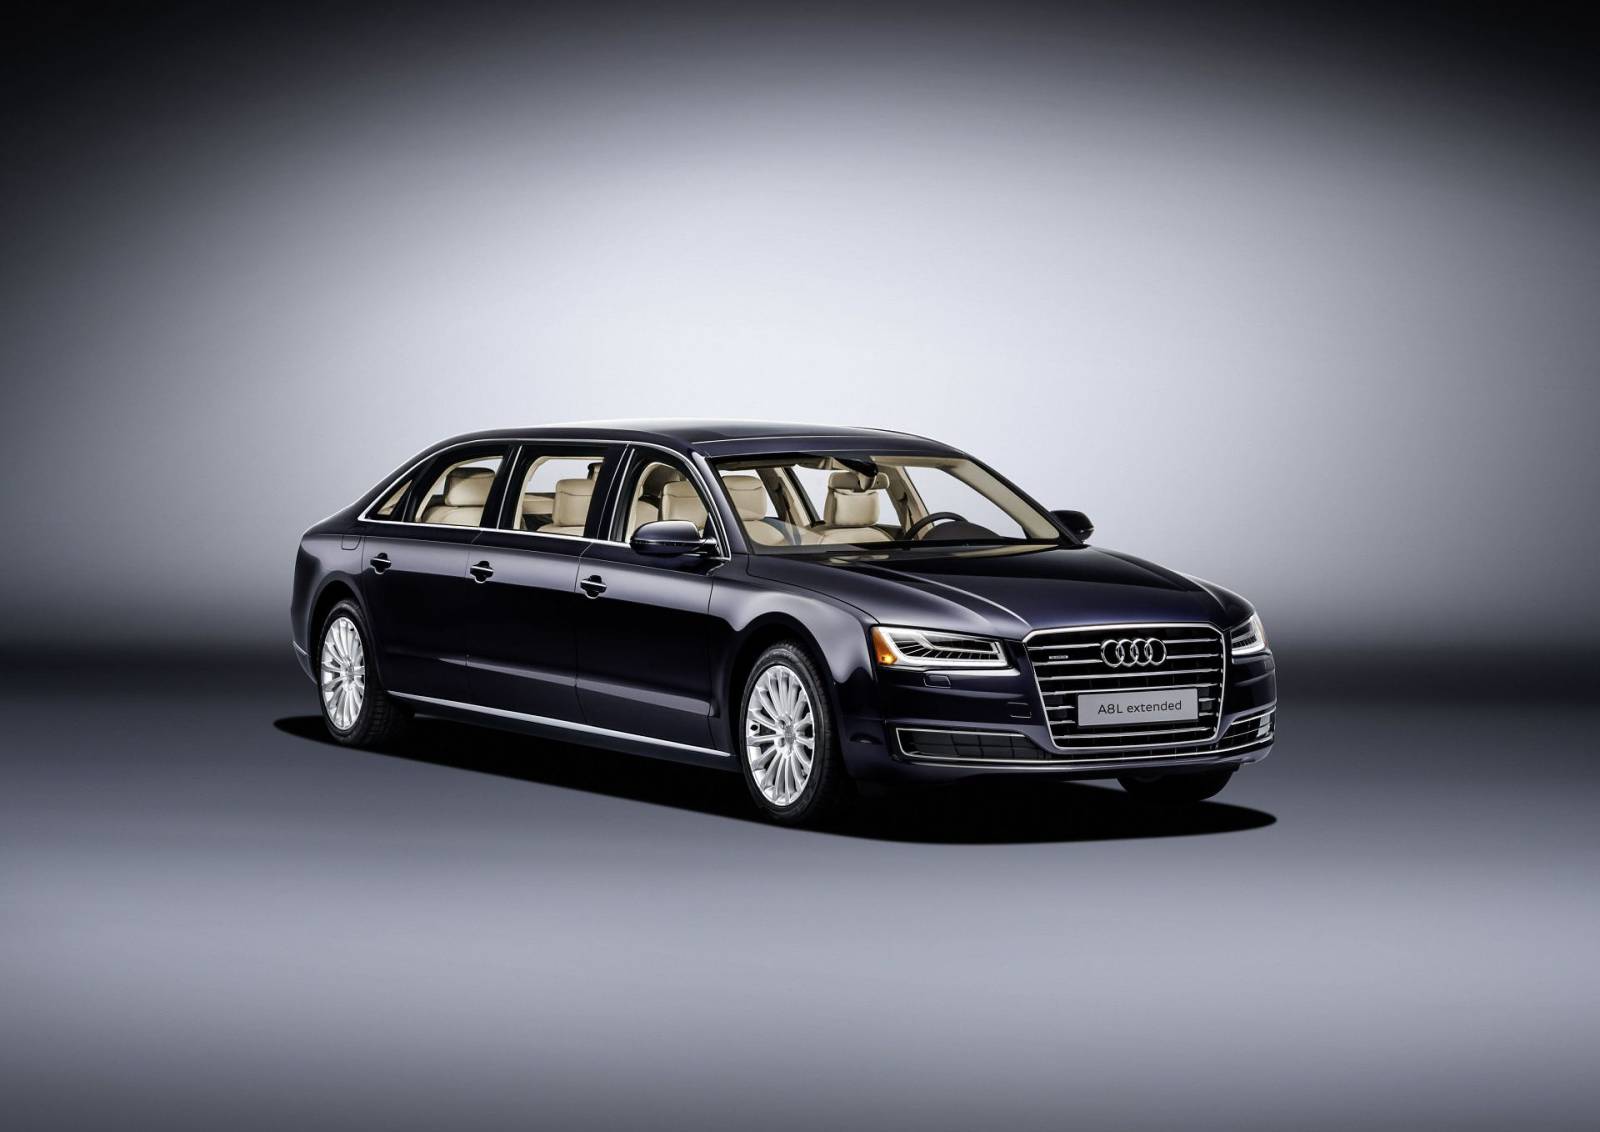 Audi-A8-L-extended-01